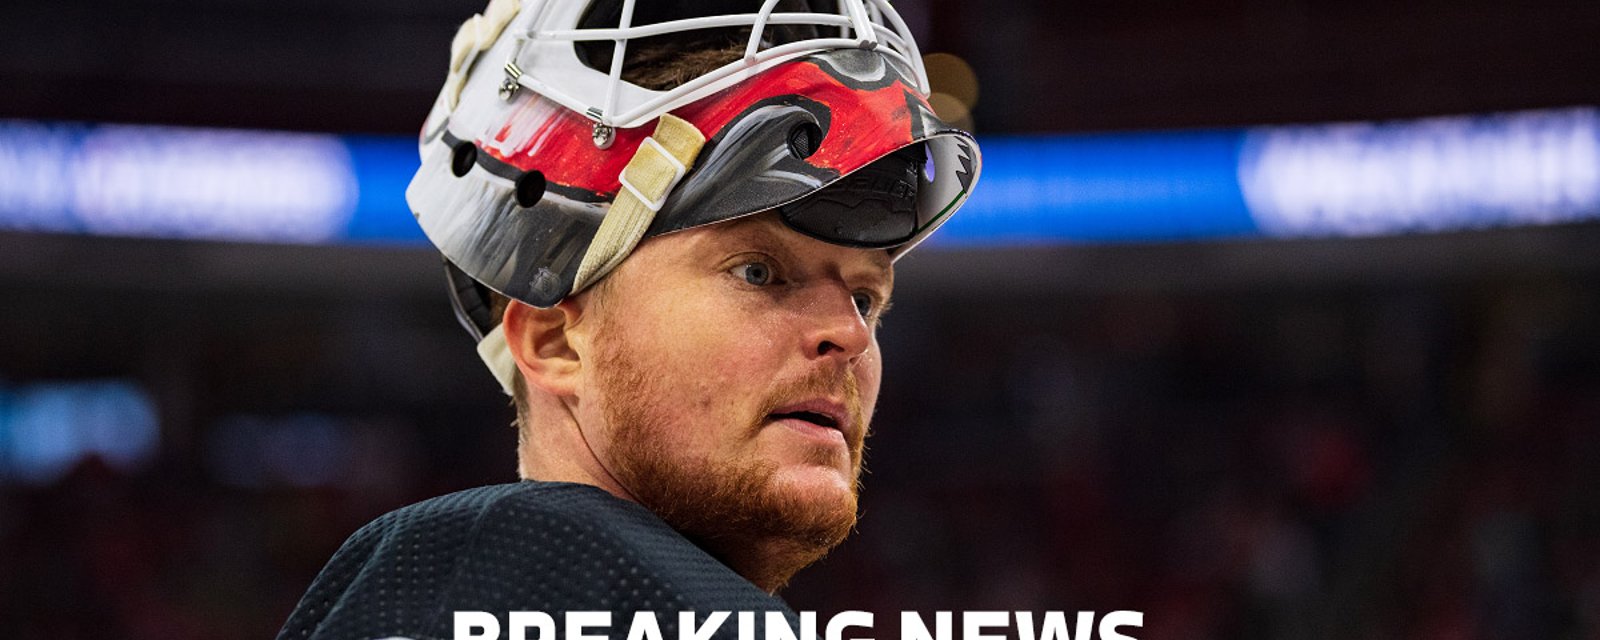 Former All-Star Cory Schneider has been placed on waivers.